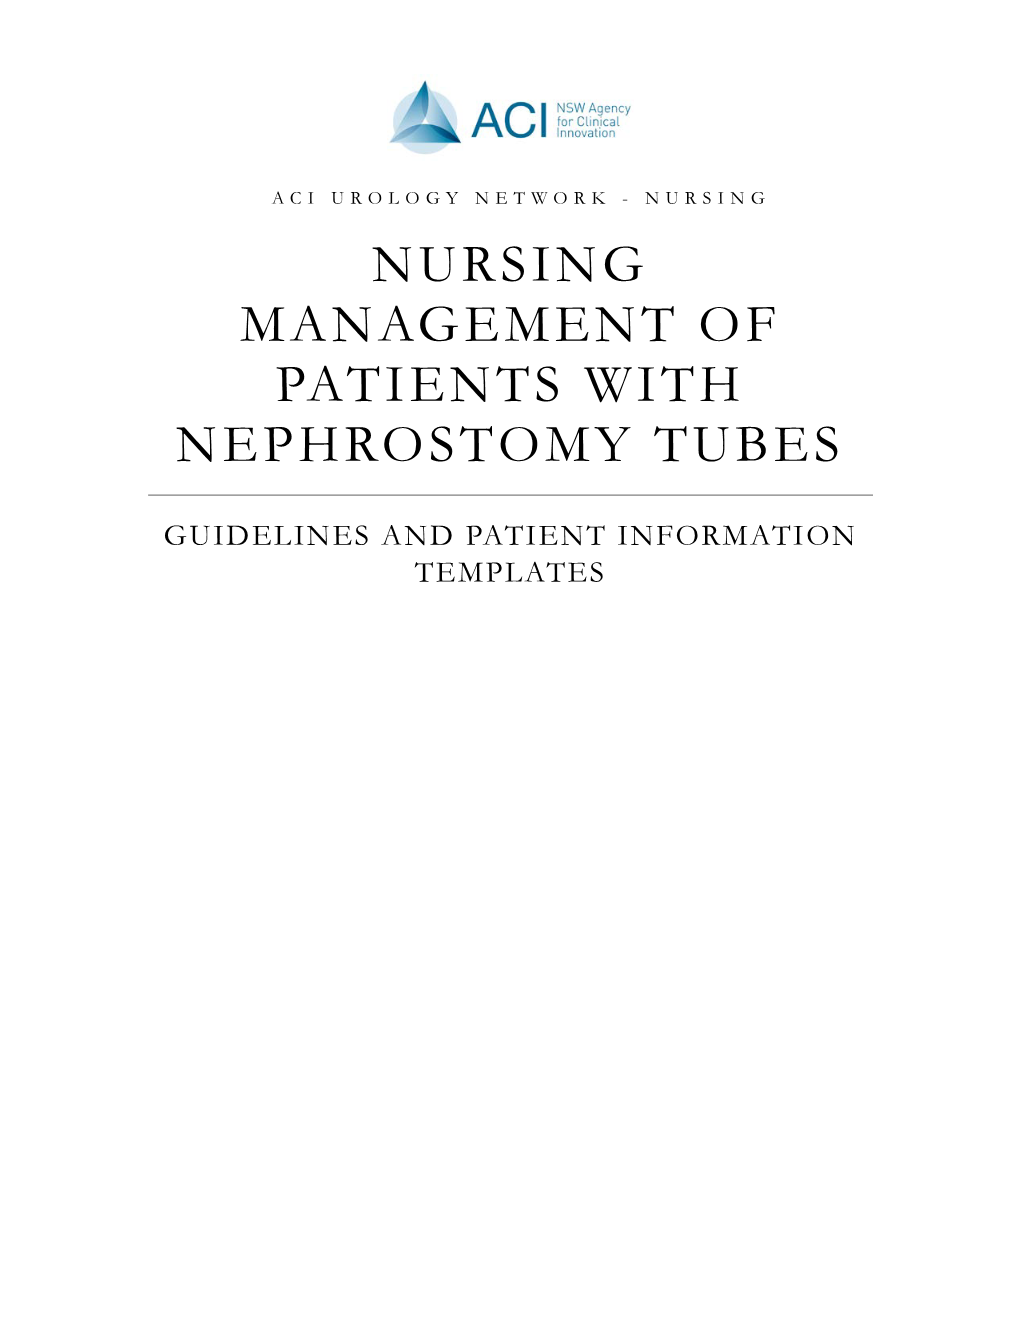 Nursing Management of Patients with Nephrostomy Tubes